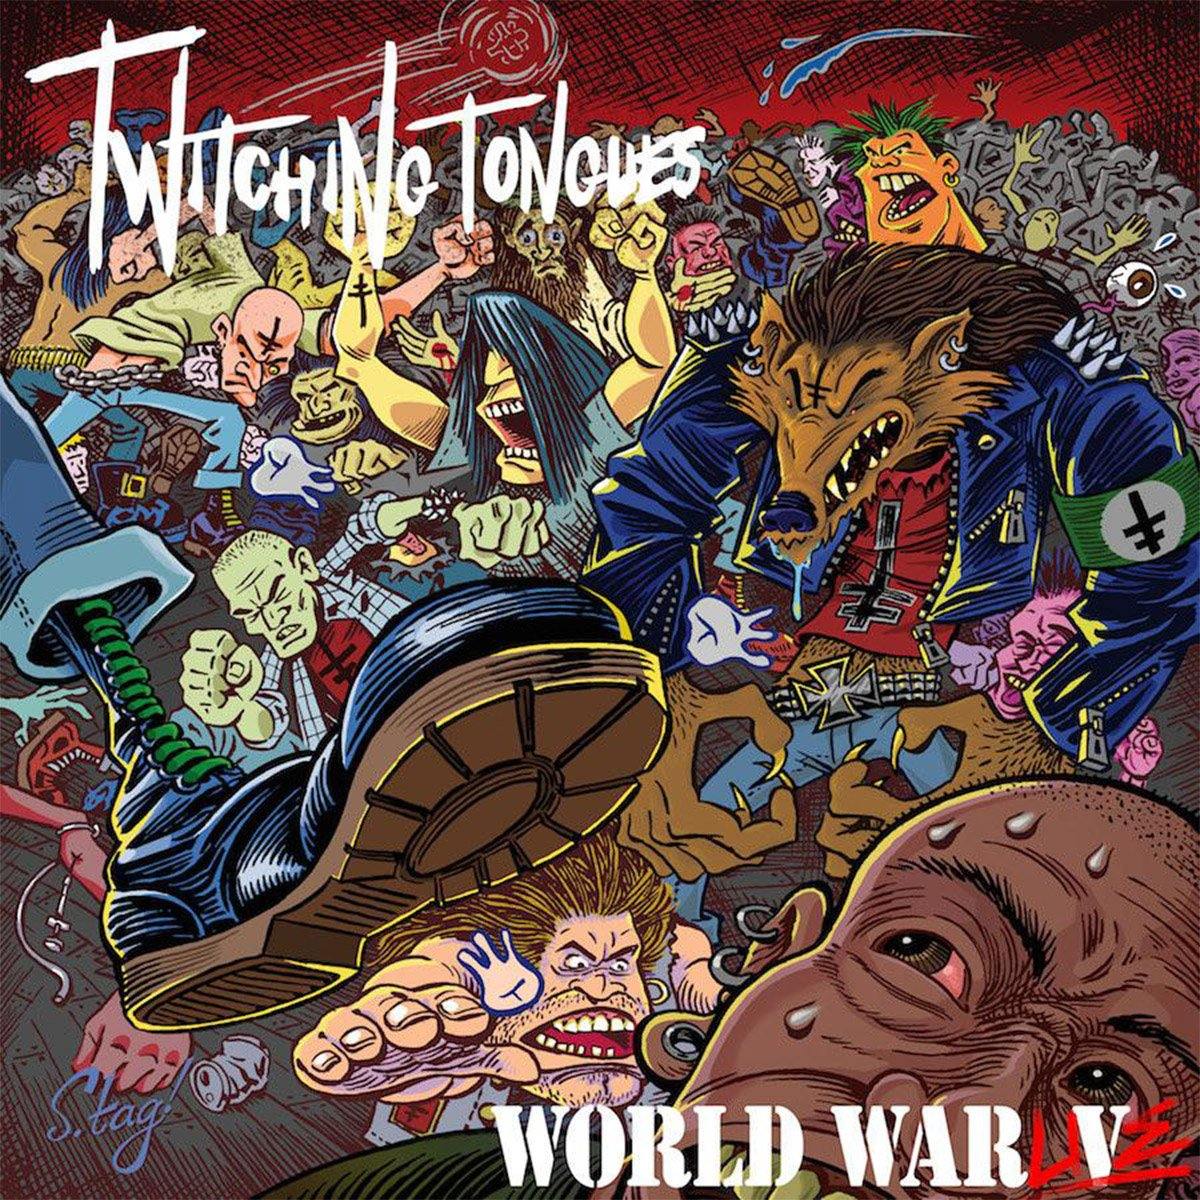 Buy – Twitching Tongues "World War Live" 12" – Band & Music Merch – Cold Cuts Merch